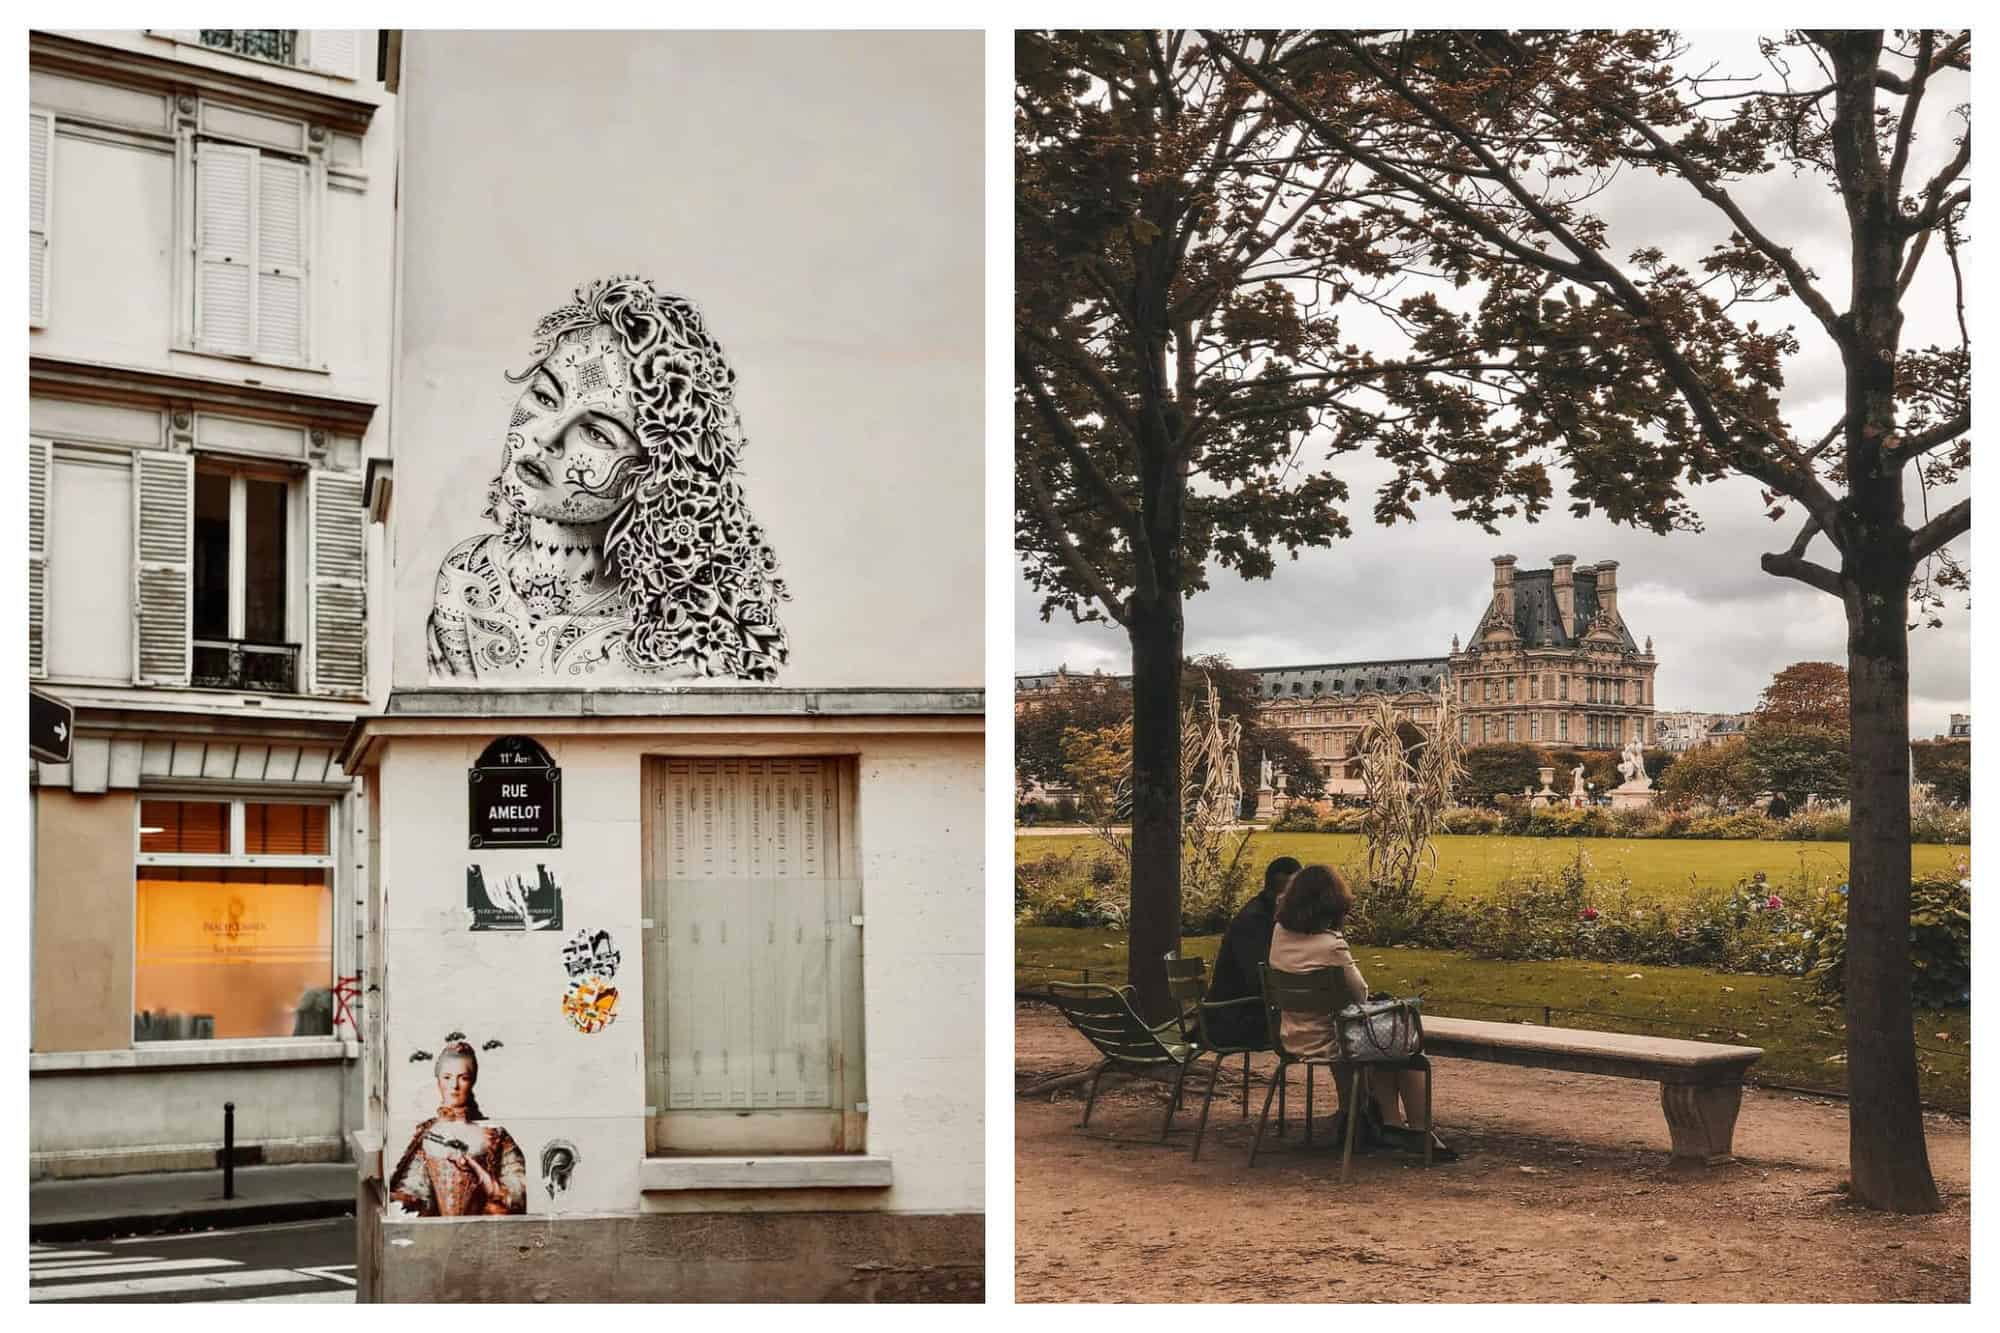 Left: Rue Amelot in the 11th arrondissement of Paris. Street art of a woman is pictured on a building. Right: Jardin des Tuileries in Paris. A couple sits on chairs with their backs facing the camera. 